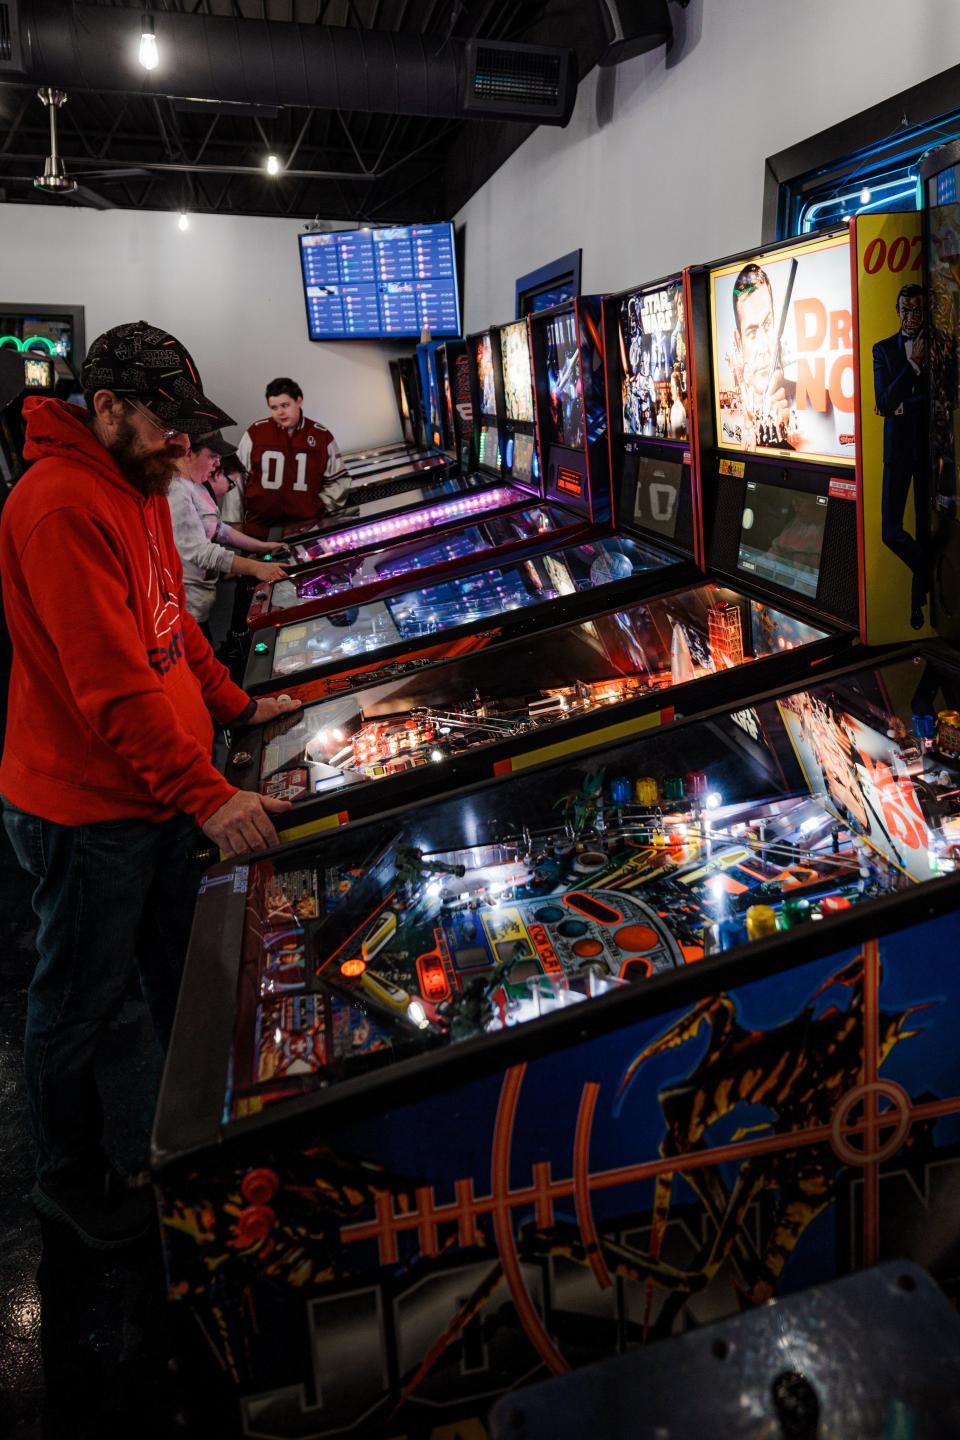 Remi's Arcade & Bistro hosts a fantastic collection of pinball games from Star Trek to Star Wars.